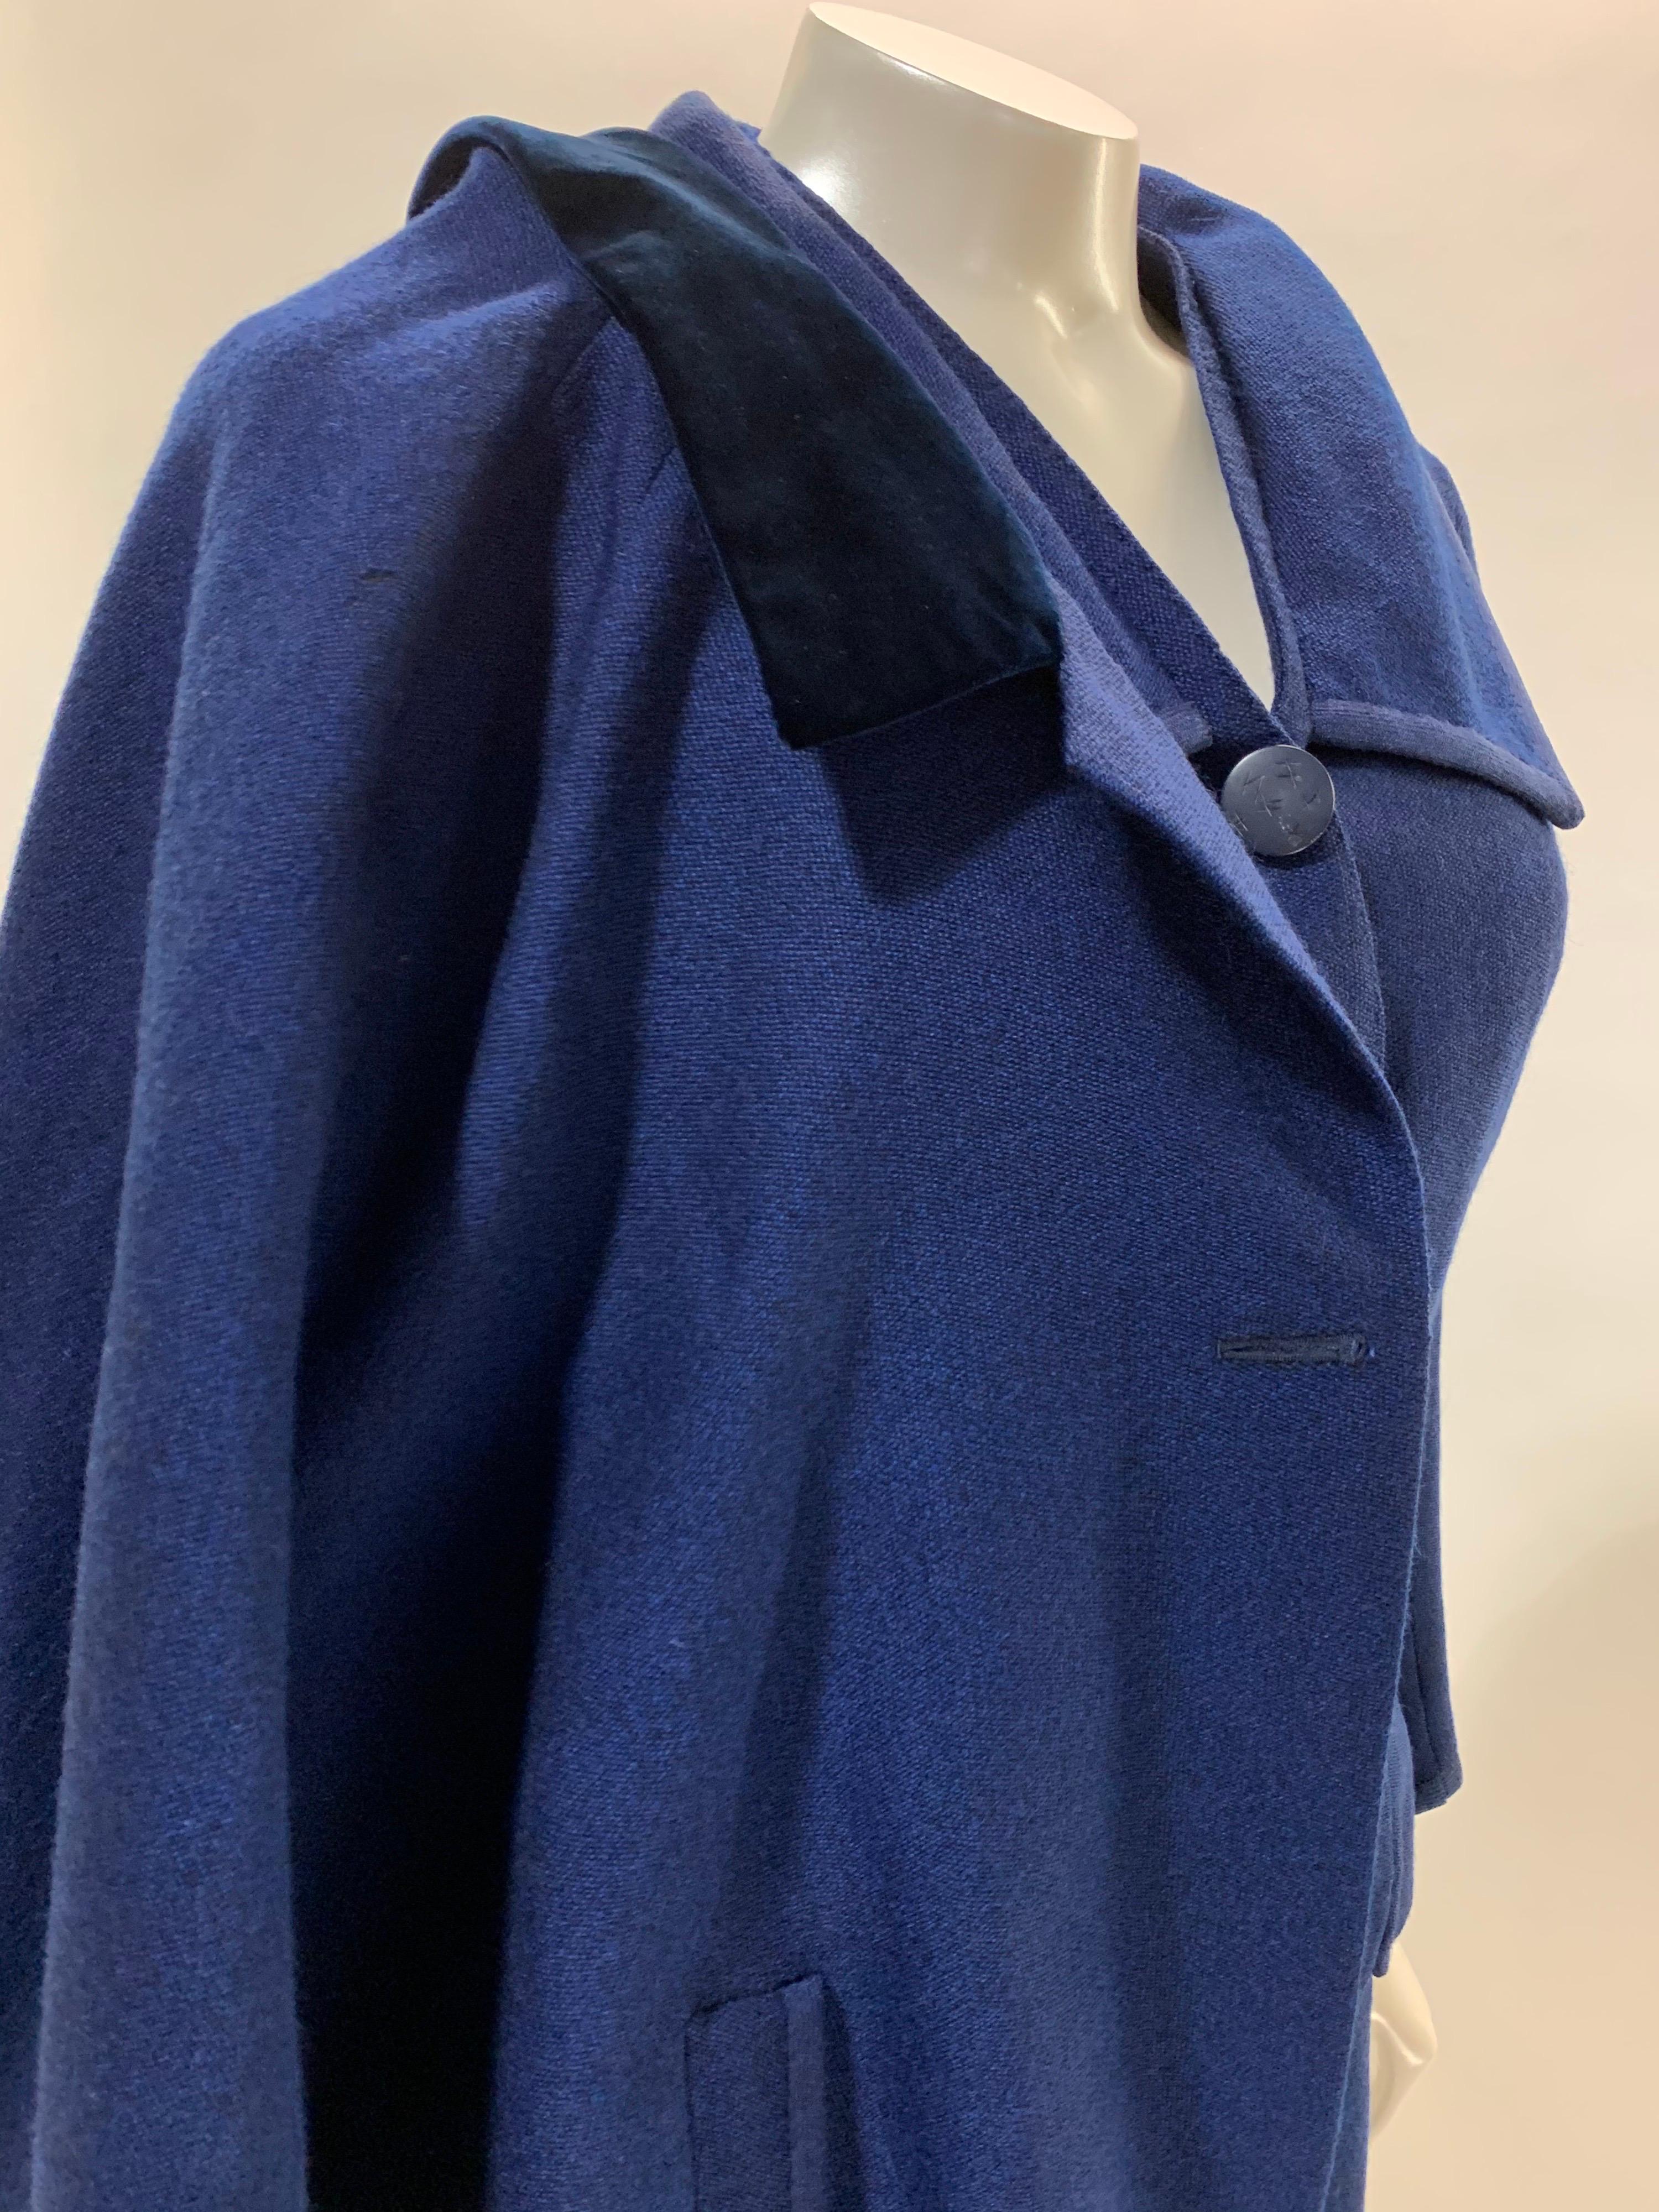 Women's 1940s Creed of London Finely Tailored Couture Royal Blue Skirt Suit w/ Caplet  For Sale